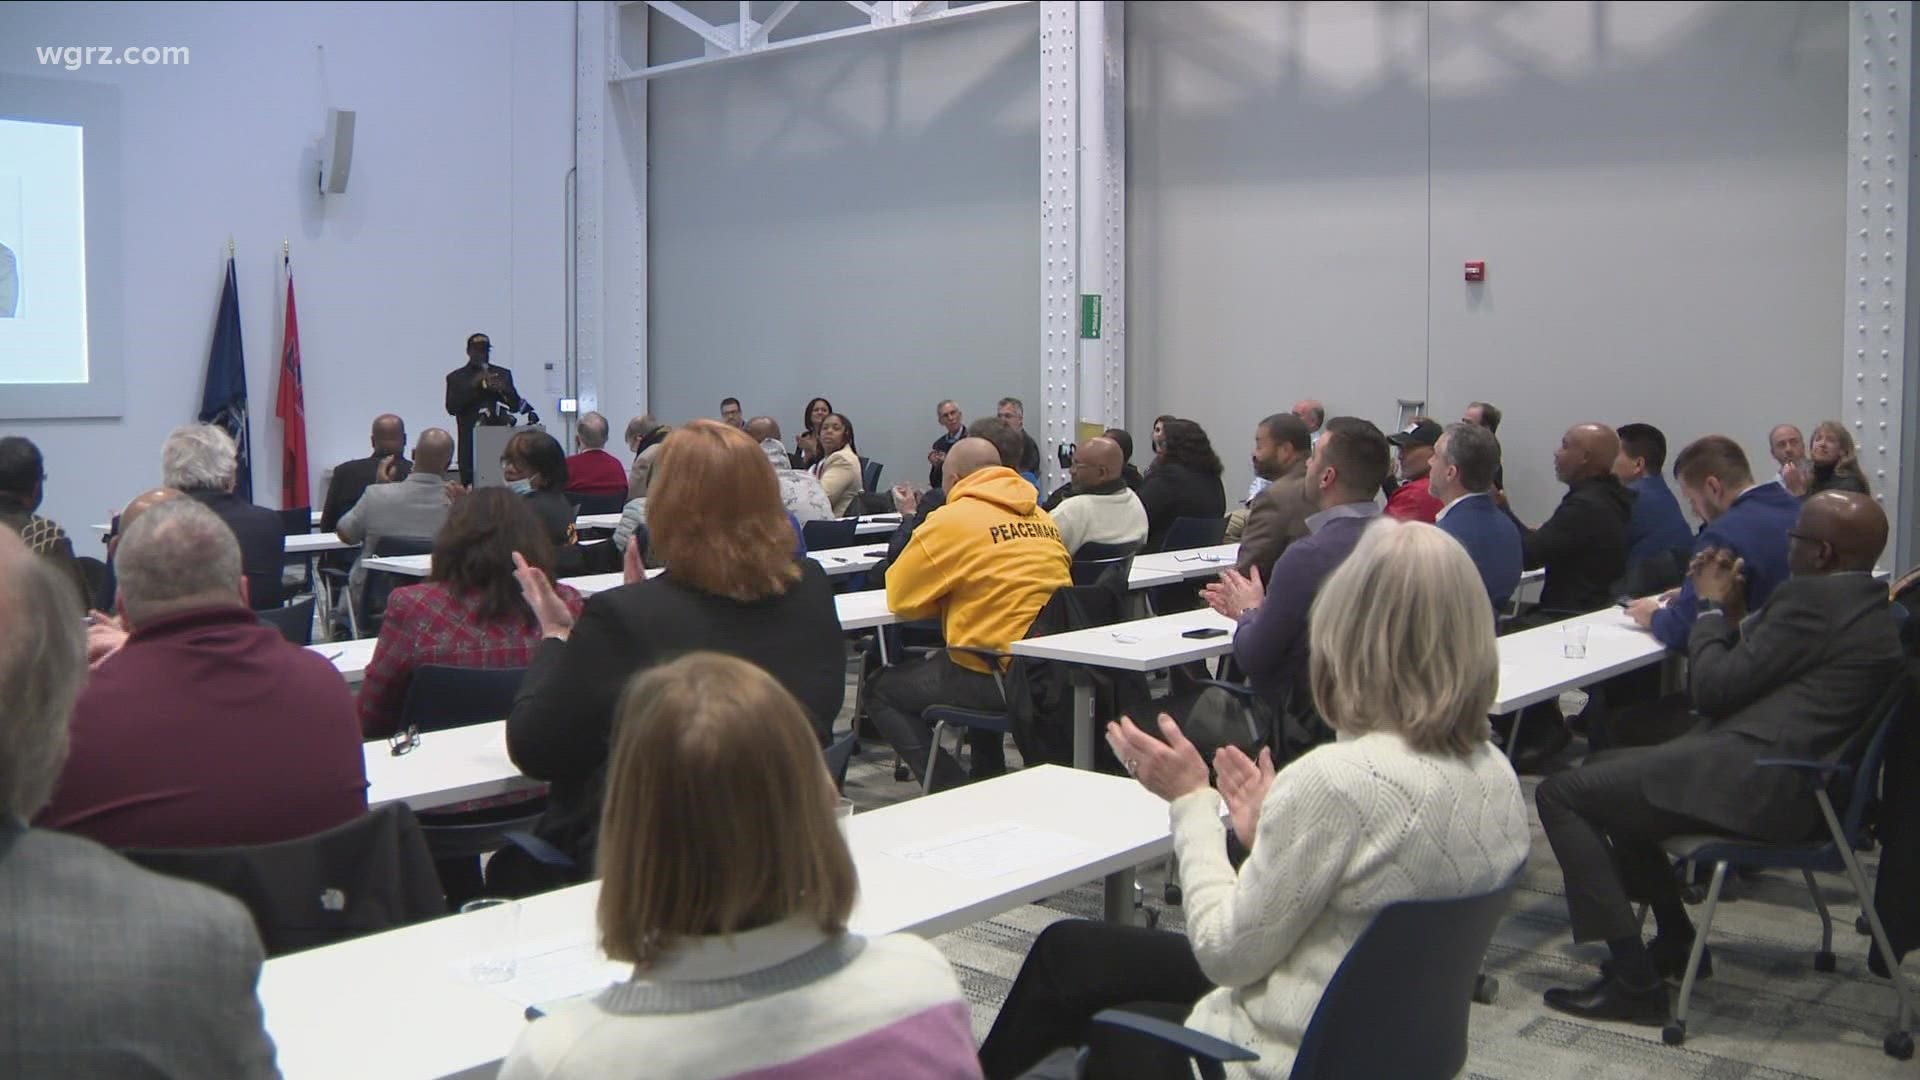 Dozens of business leaders joined community anti-violence groups Wednesday at the Northland Workforce Training Center to discuss plans to stop violence.